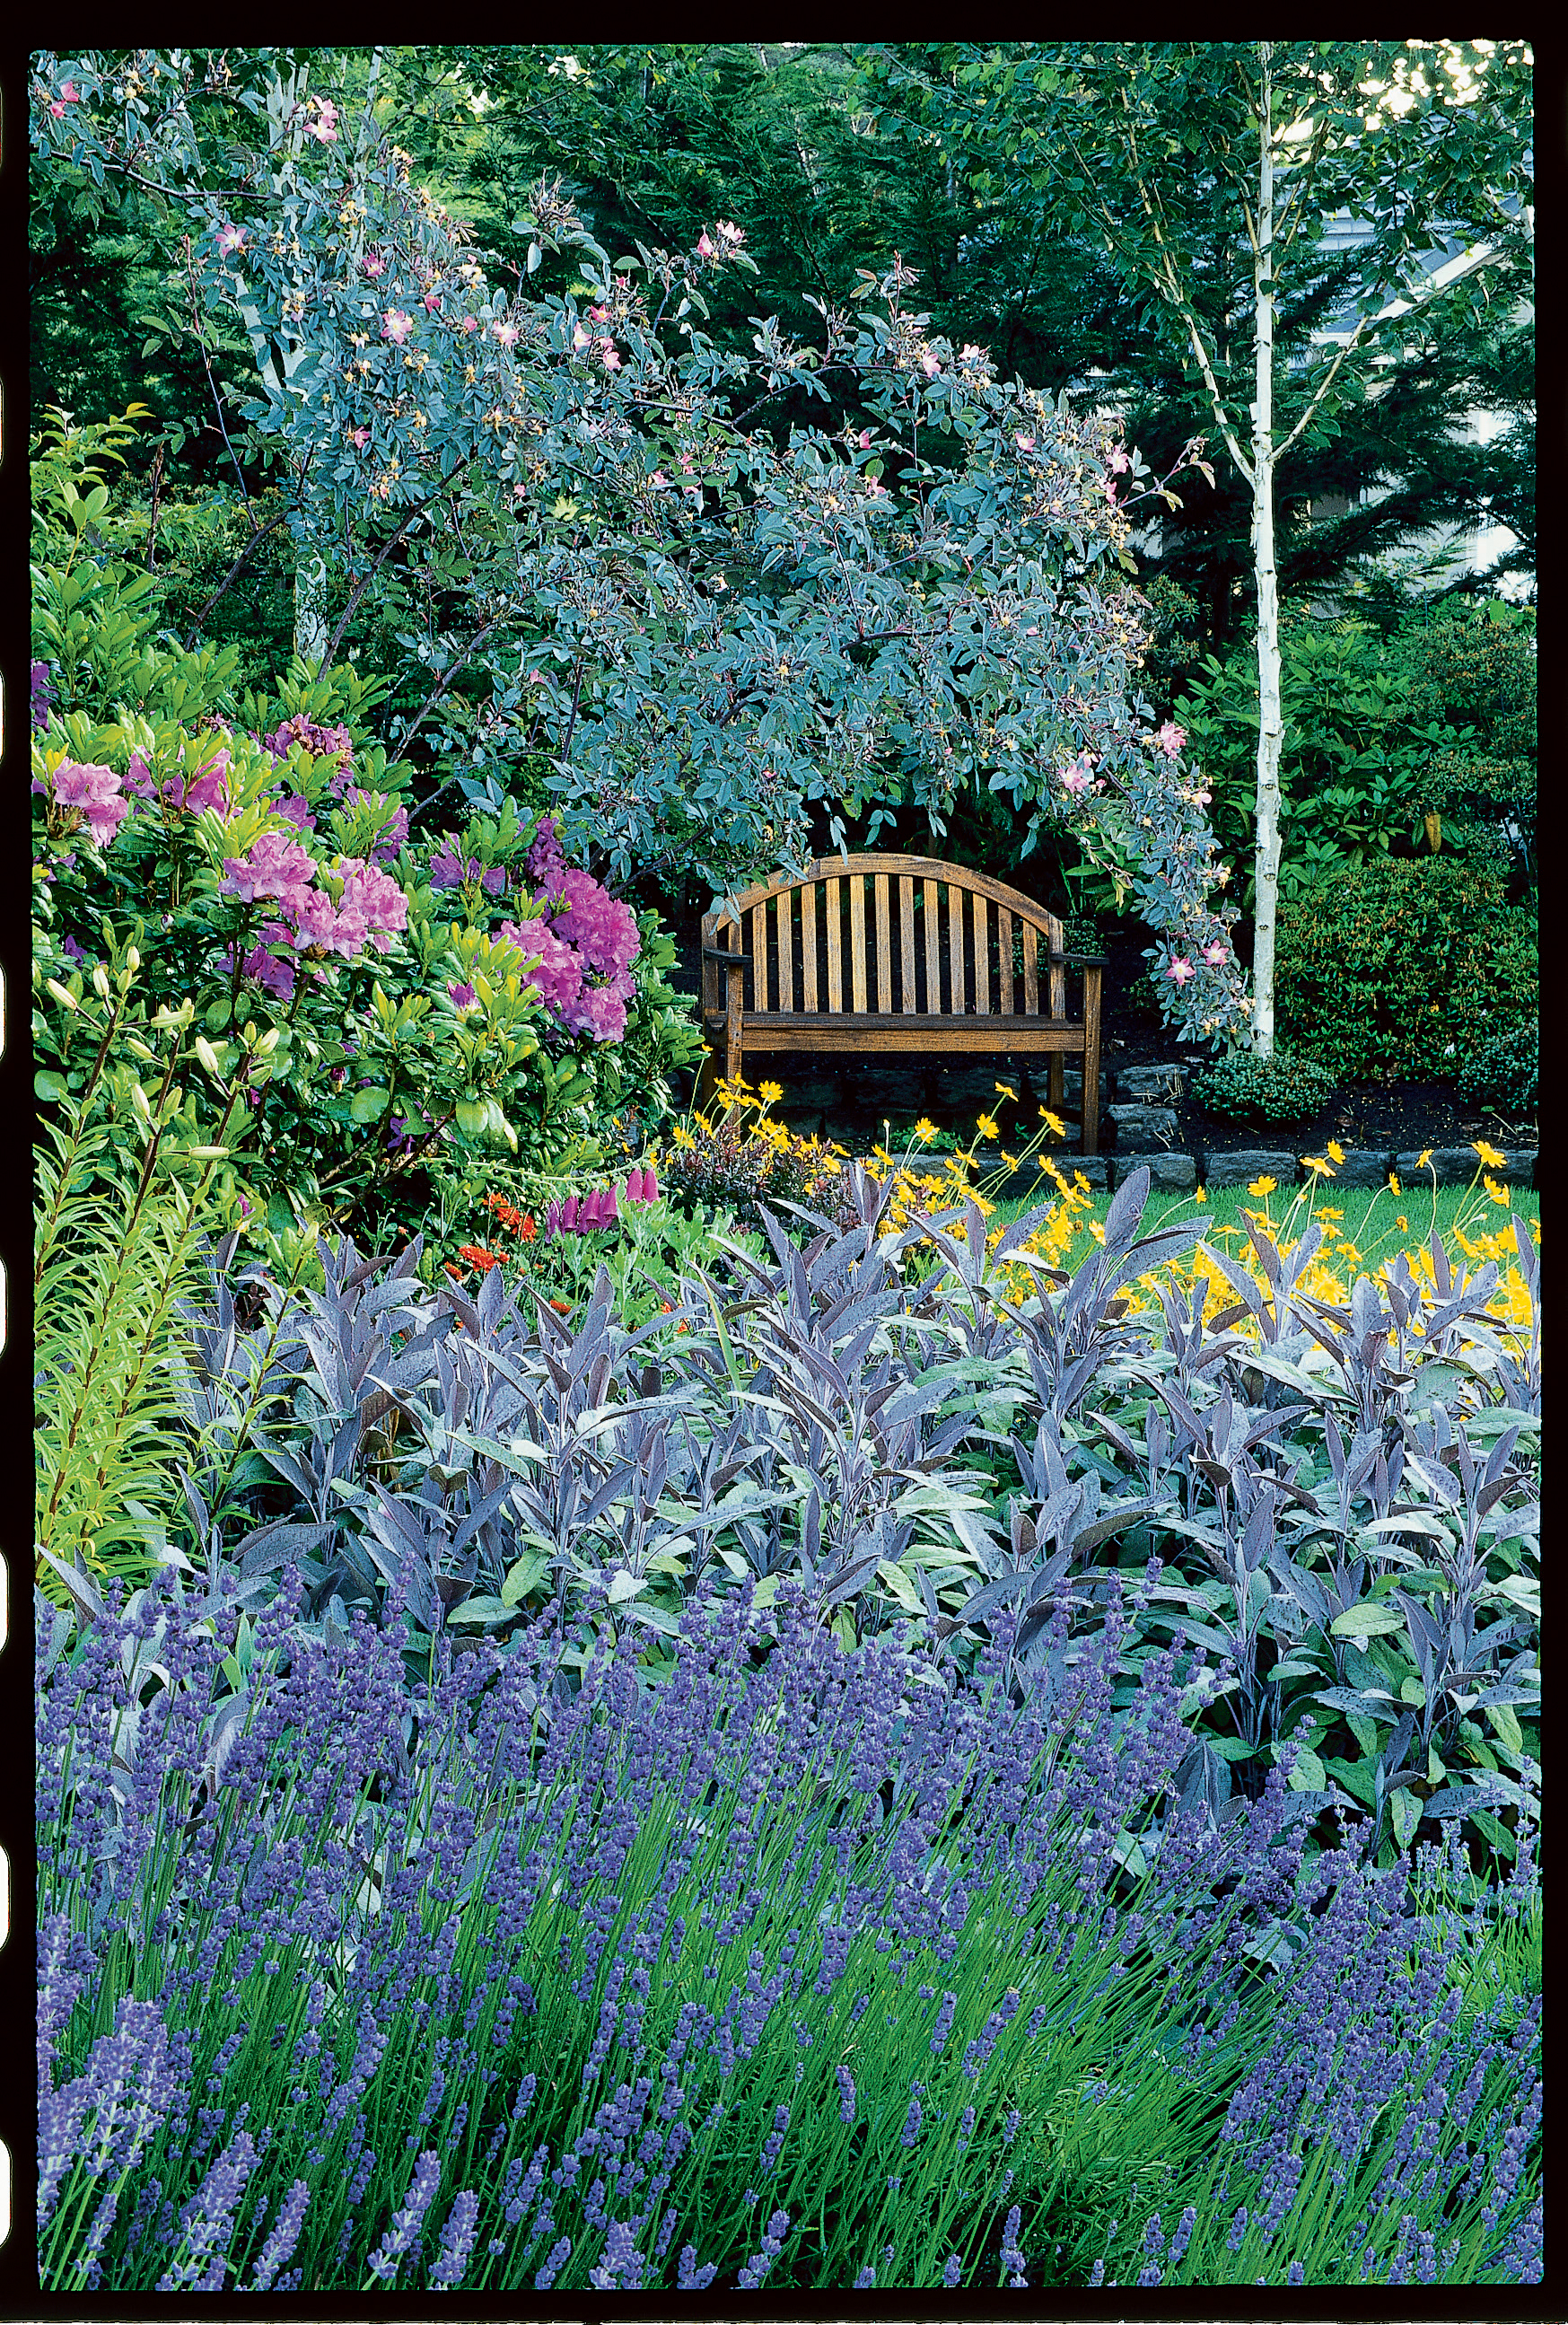 how to grow a cottage garden - sunset magazine